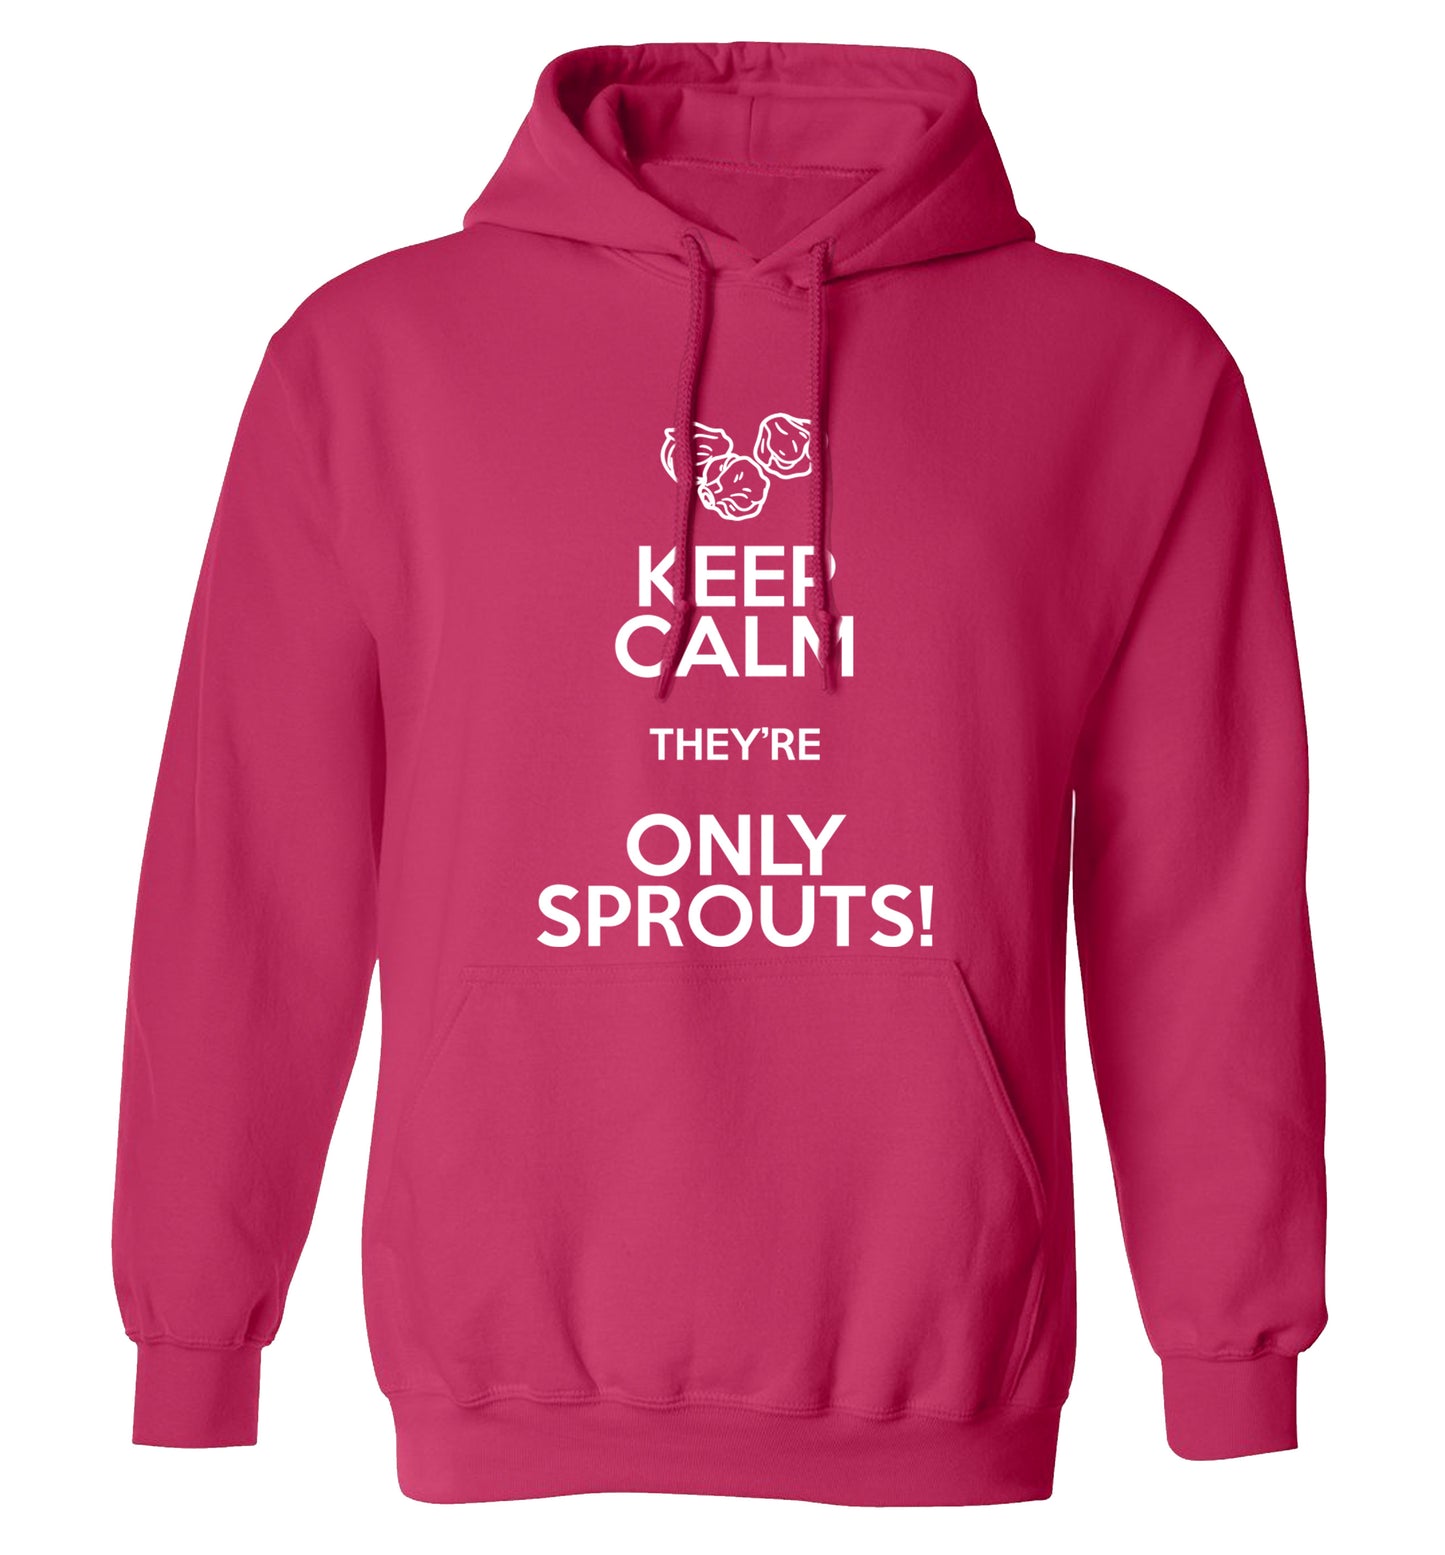 Keep calm they're only sprouts adults unisex pink hoodie 2XL